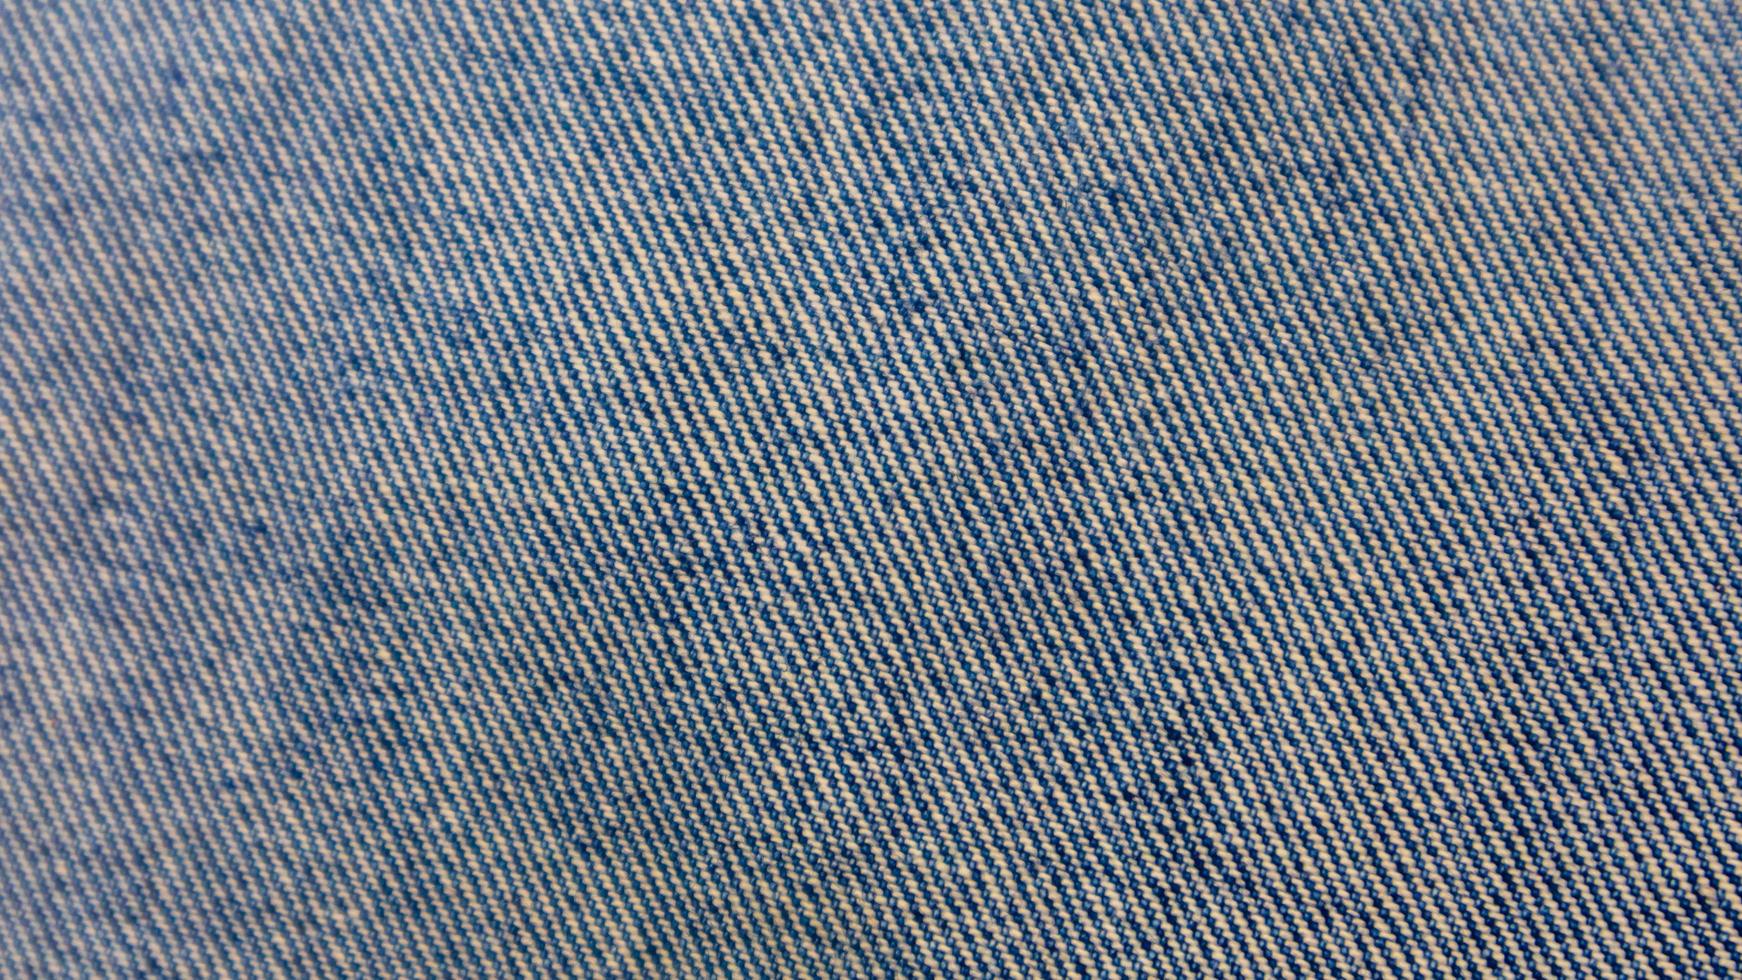 Blue jeans texture as a background photo